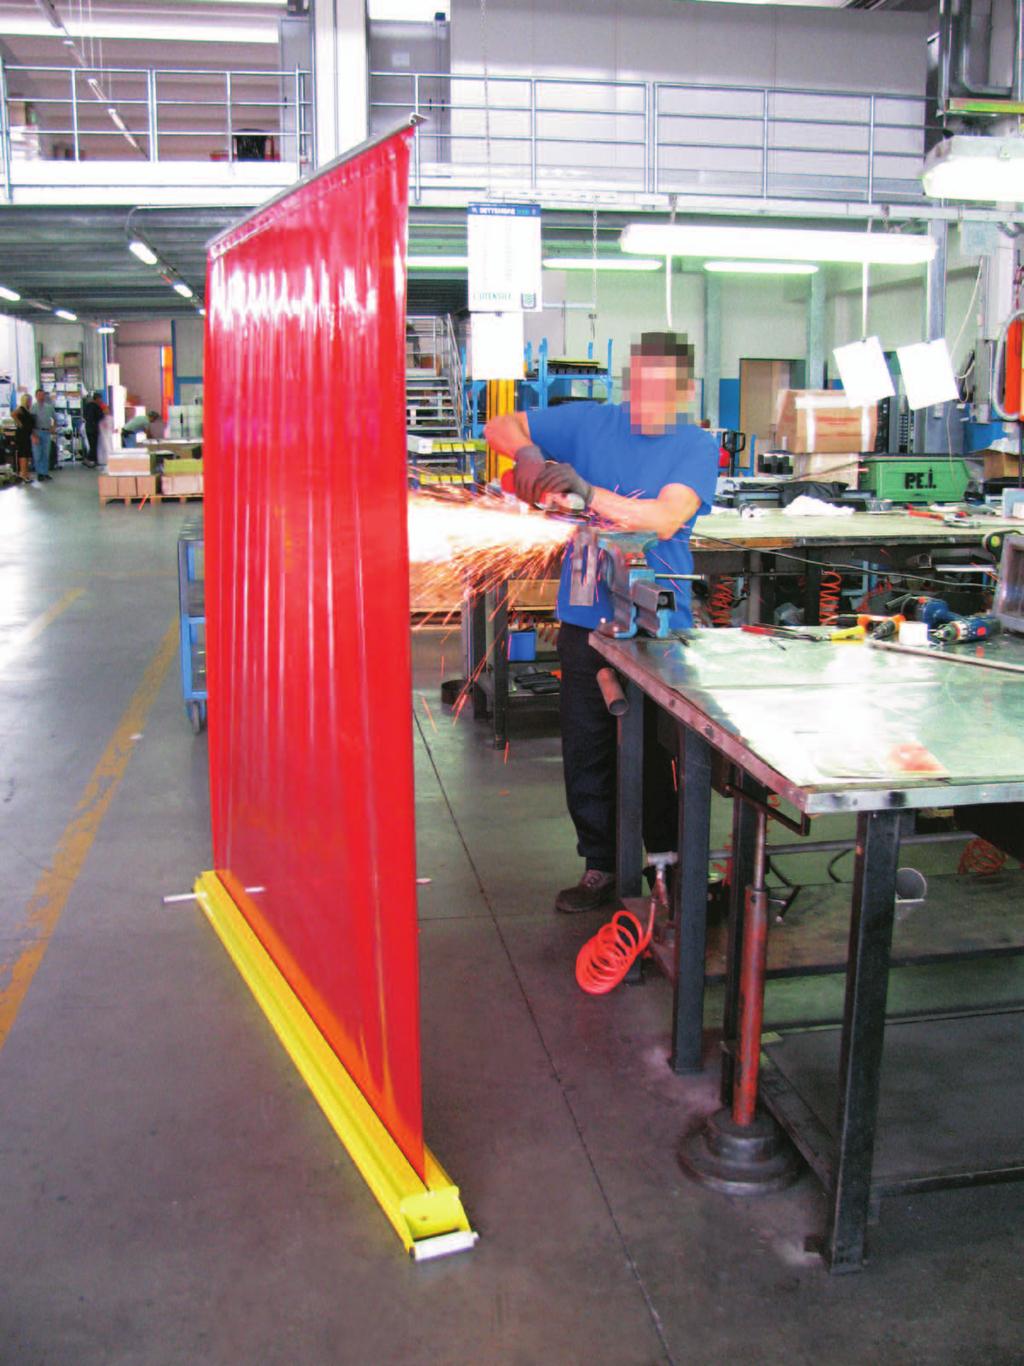 SIZES WELD SCREEN is foldaway making it compact and portable.